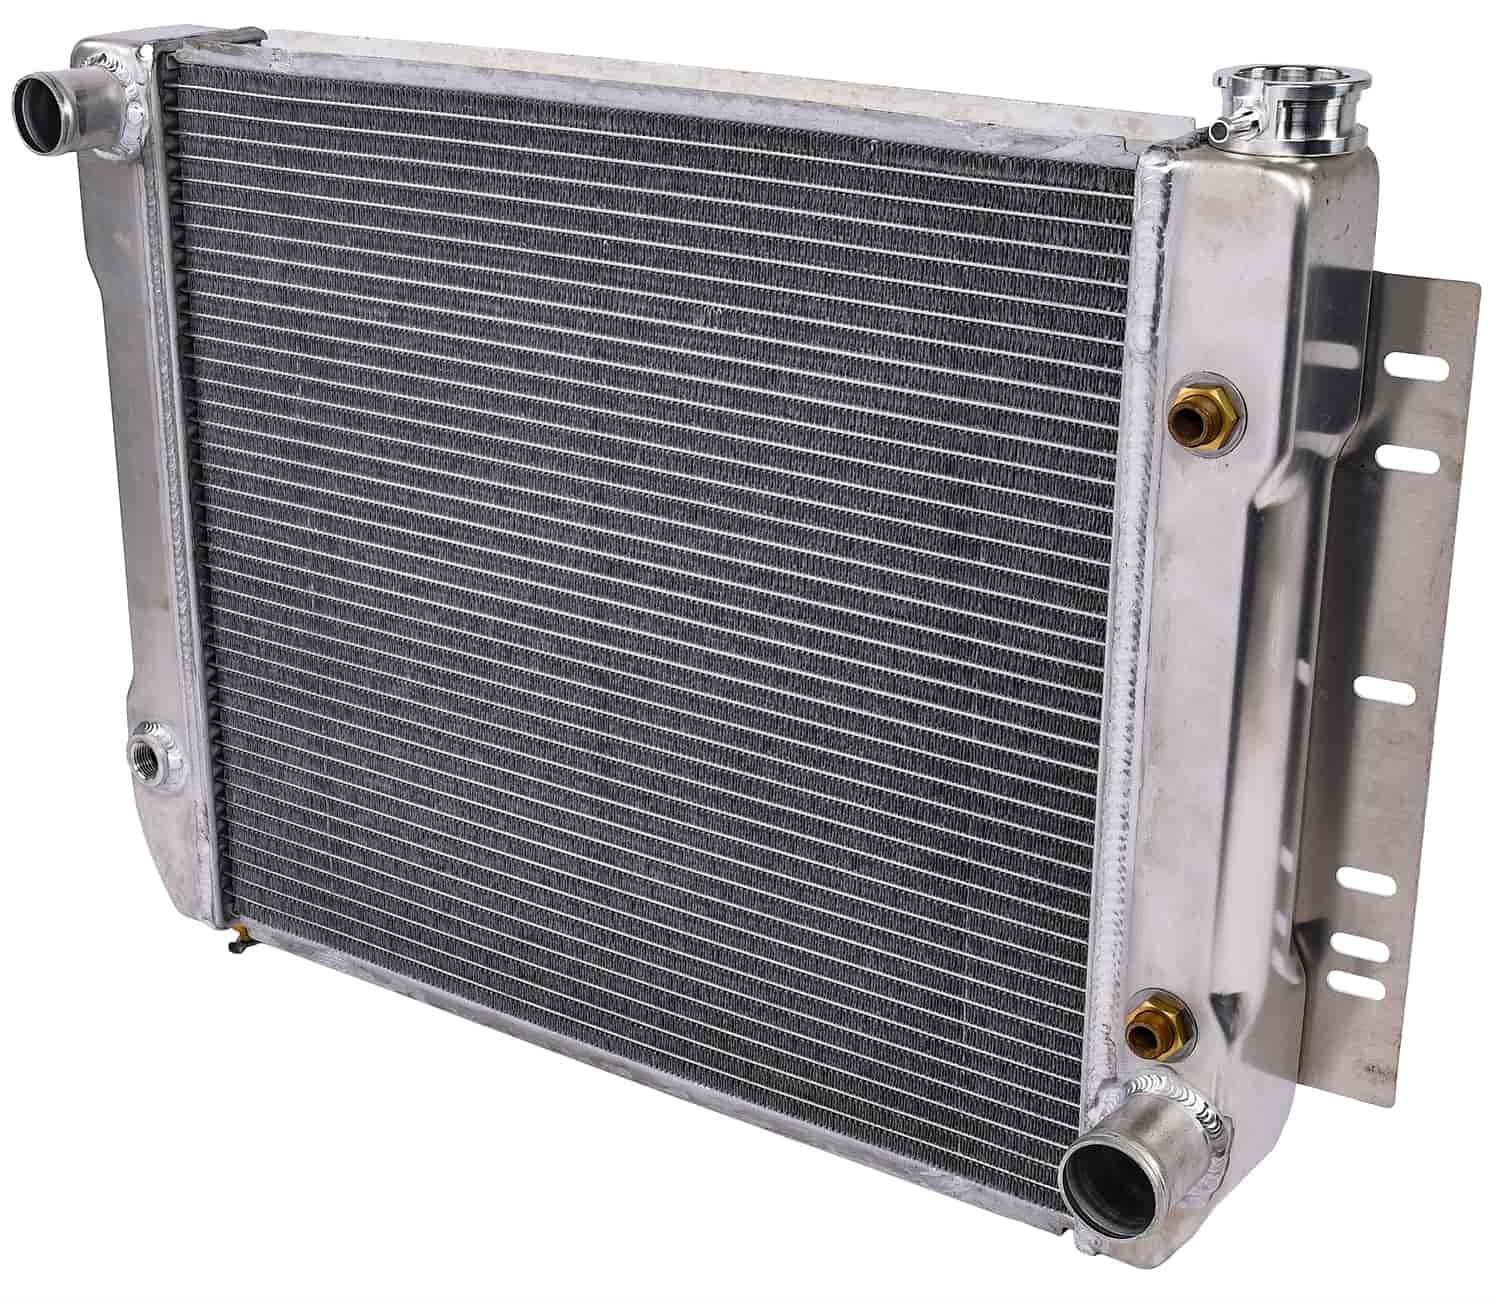 Ready Fit Aluminum Radiator 1959-1970 Bel Air, 1963-1970 Biscayne, 1966-1970 Impala Small Block Chevy, Automatic Transmission